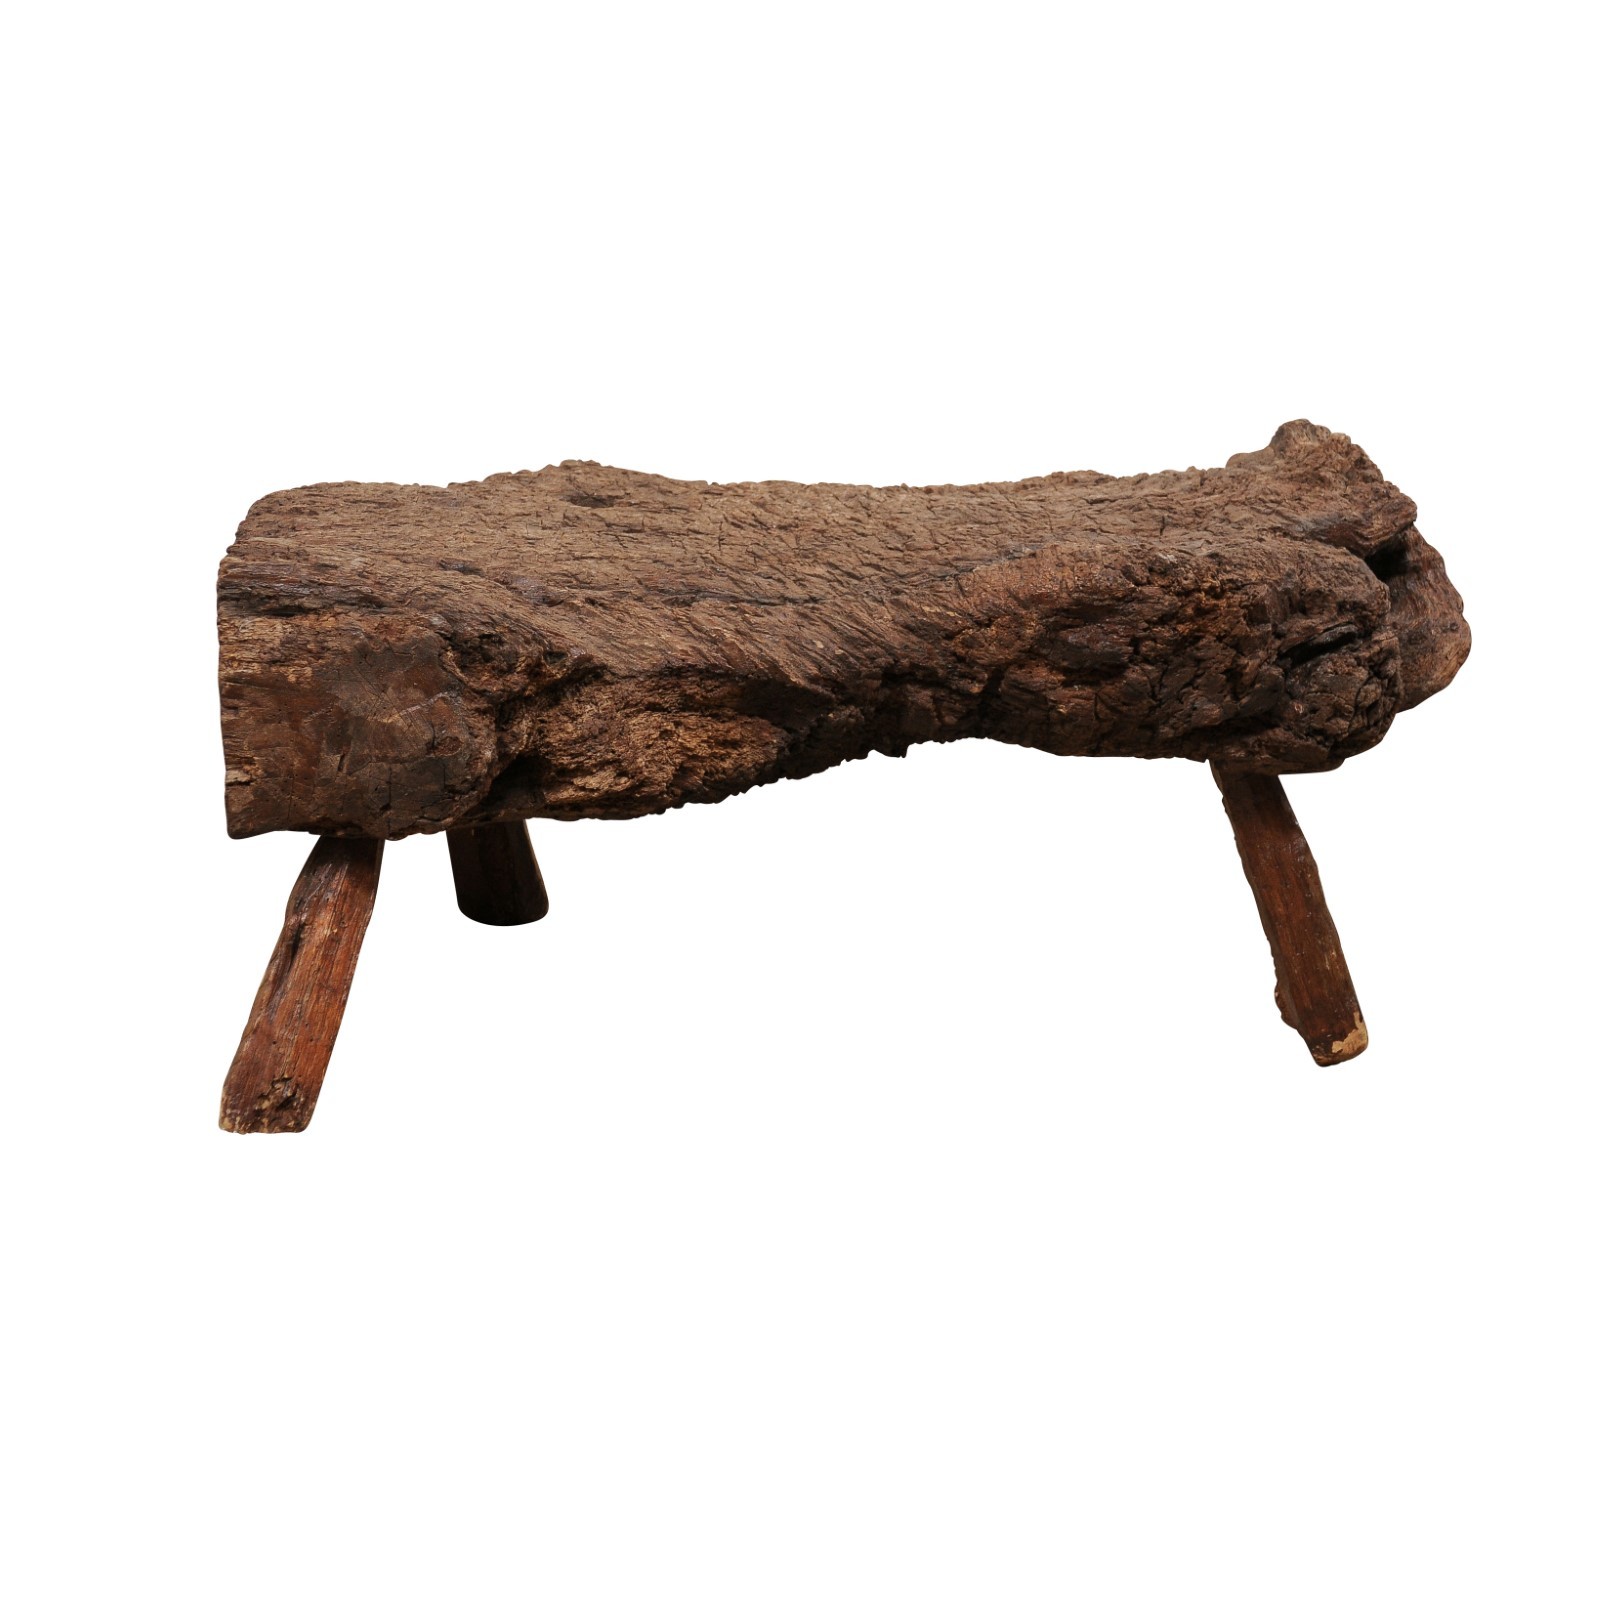 A Spanish Small, Rustic Burl Wood Table